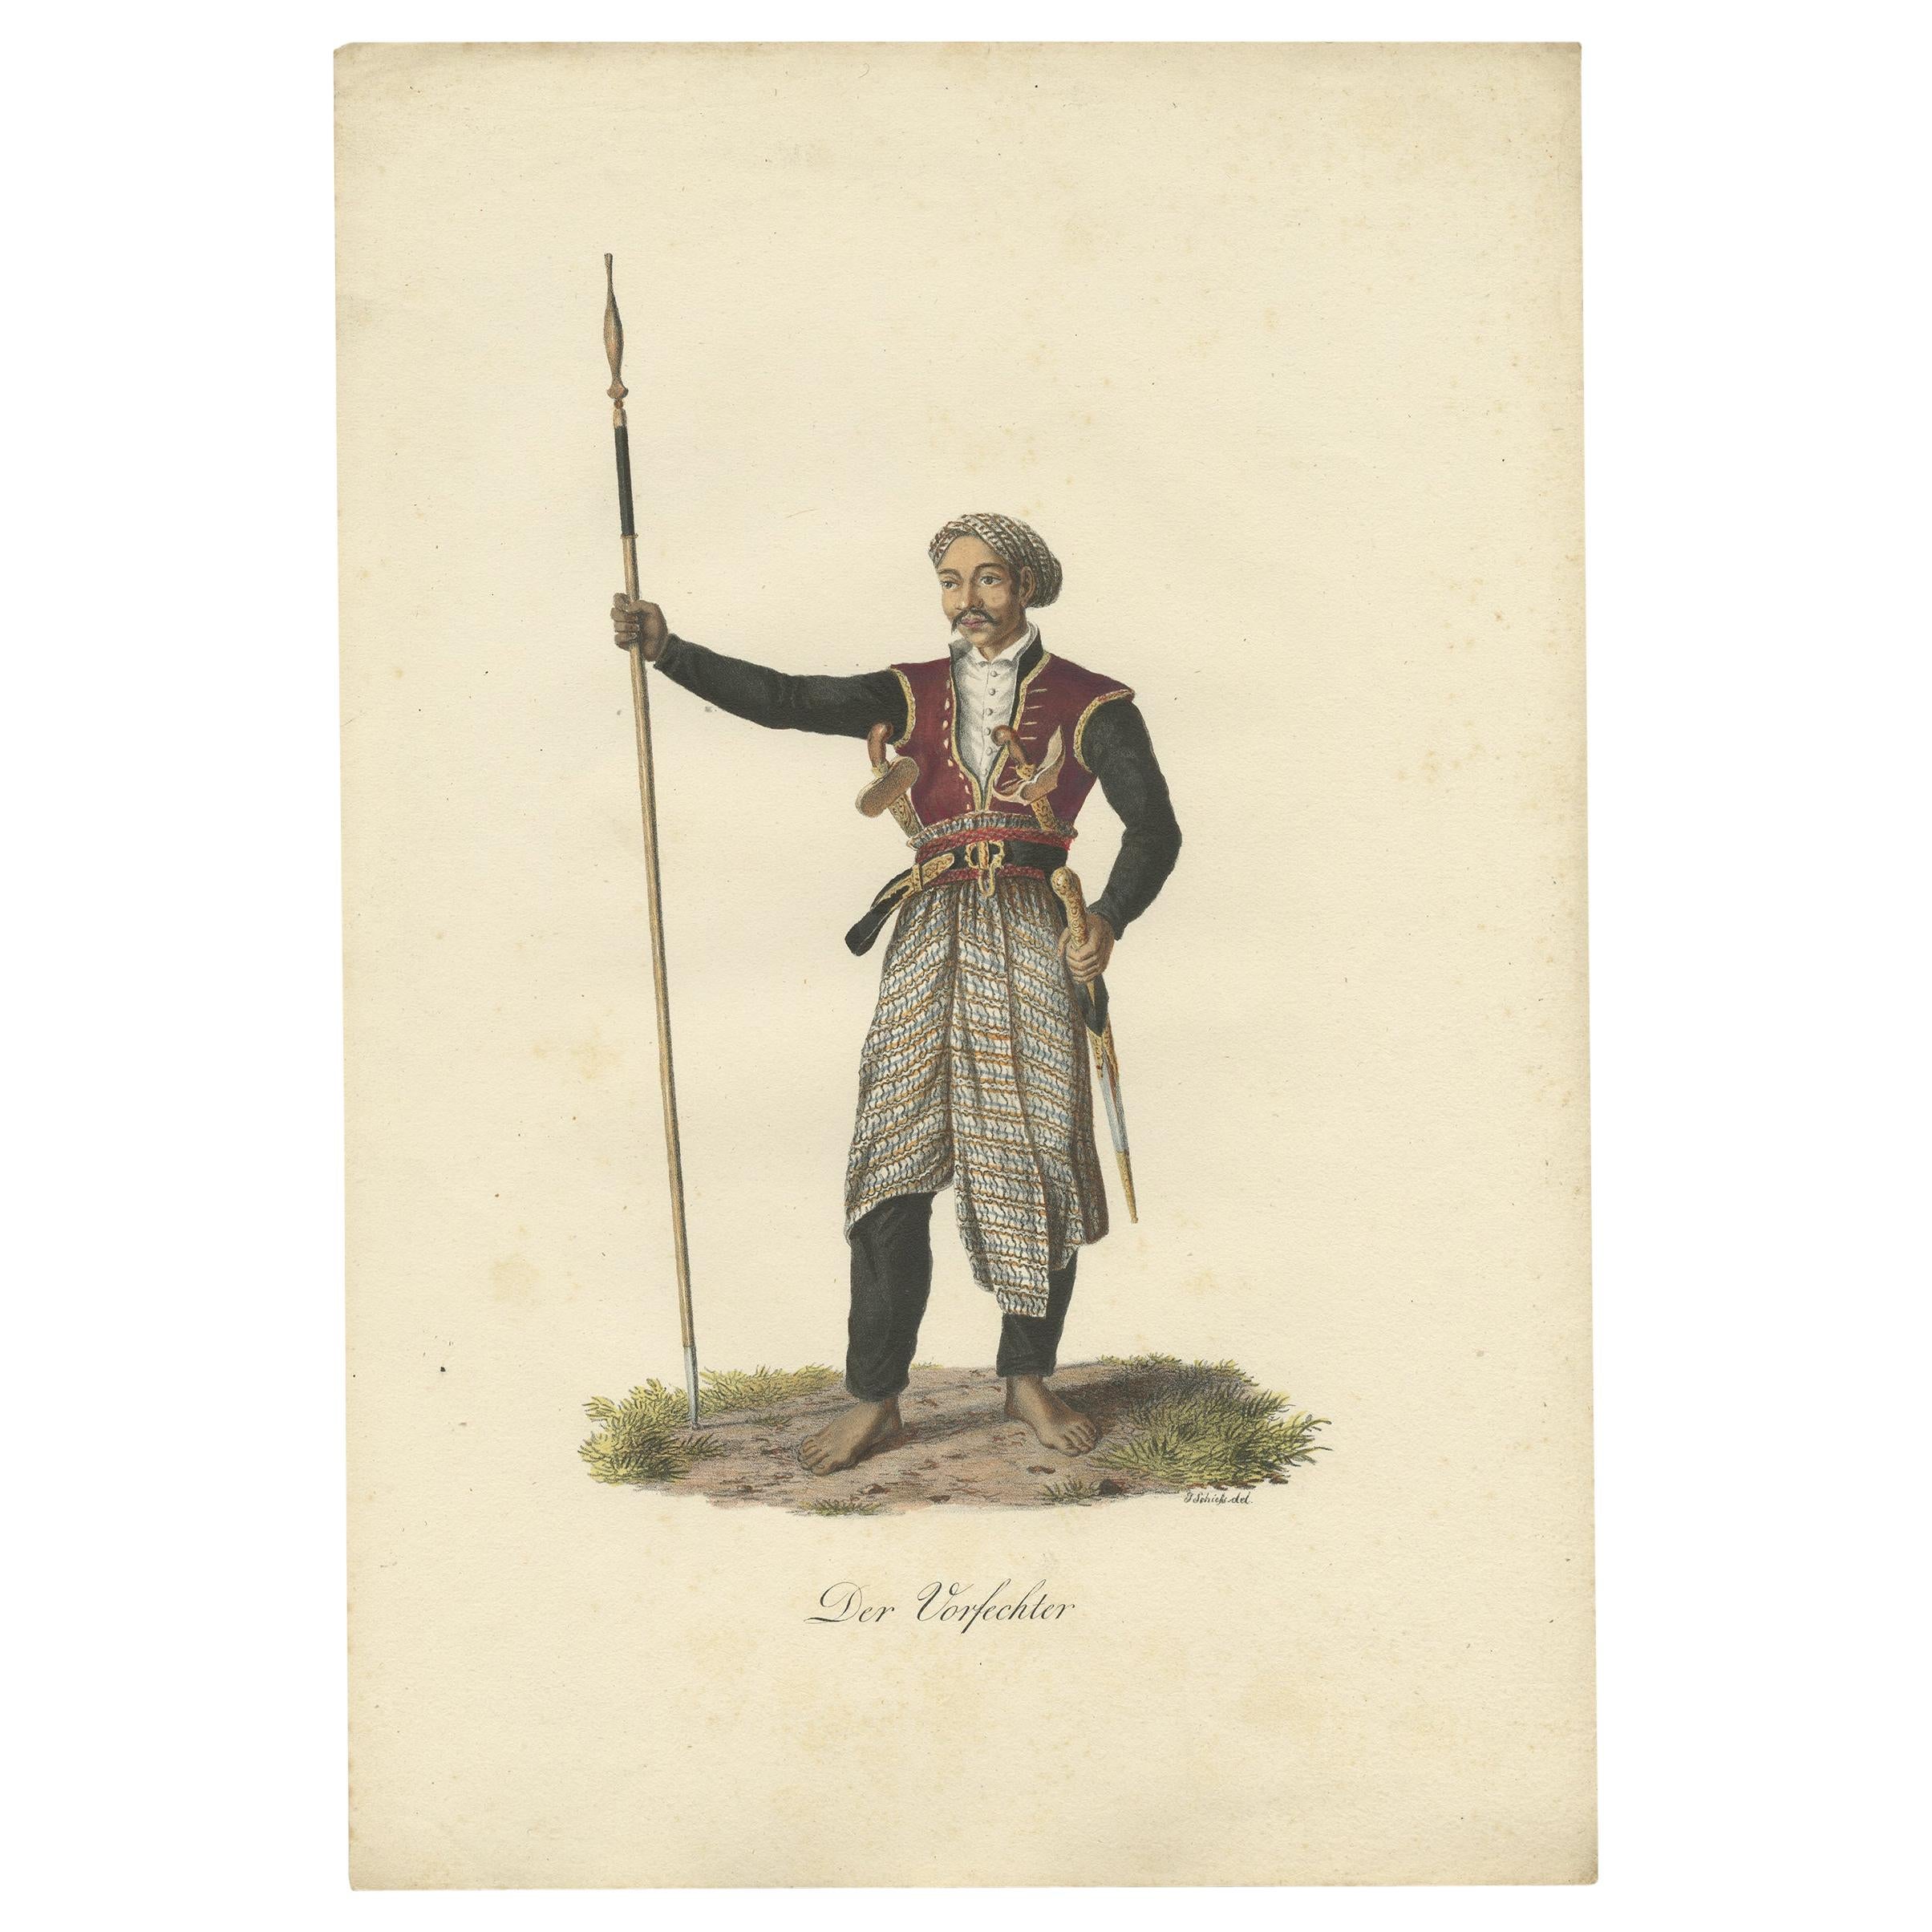 Superb Decorative Antique Print of a Proud Warrior from Java, Indonesia c.1830